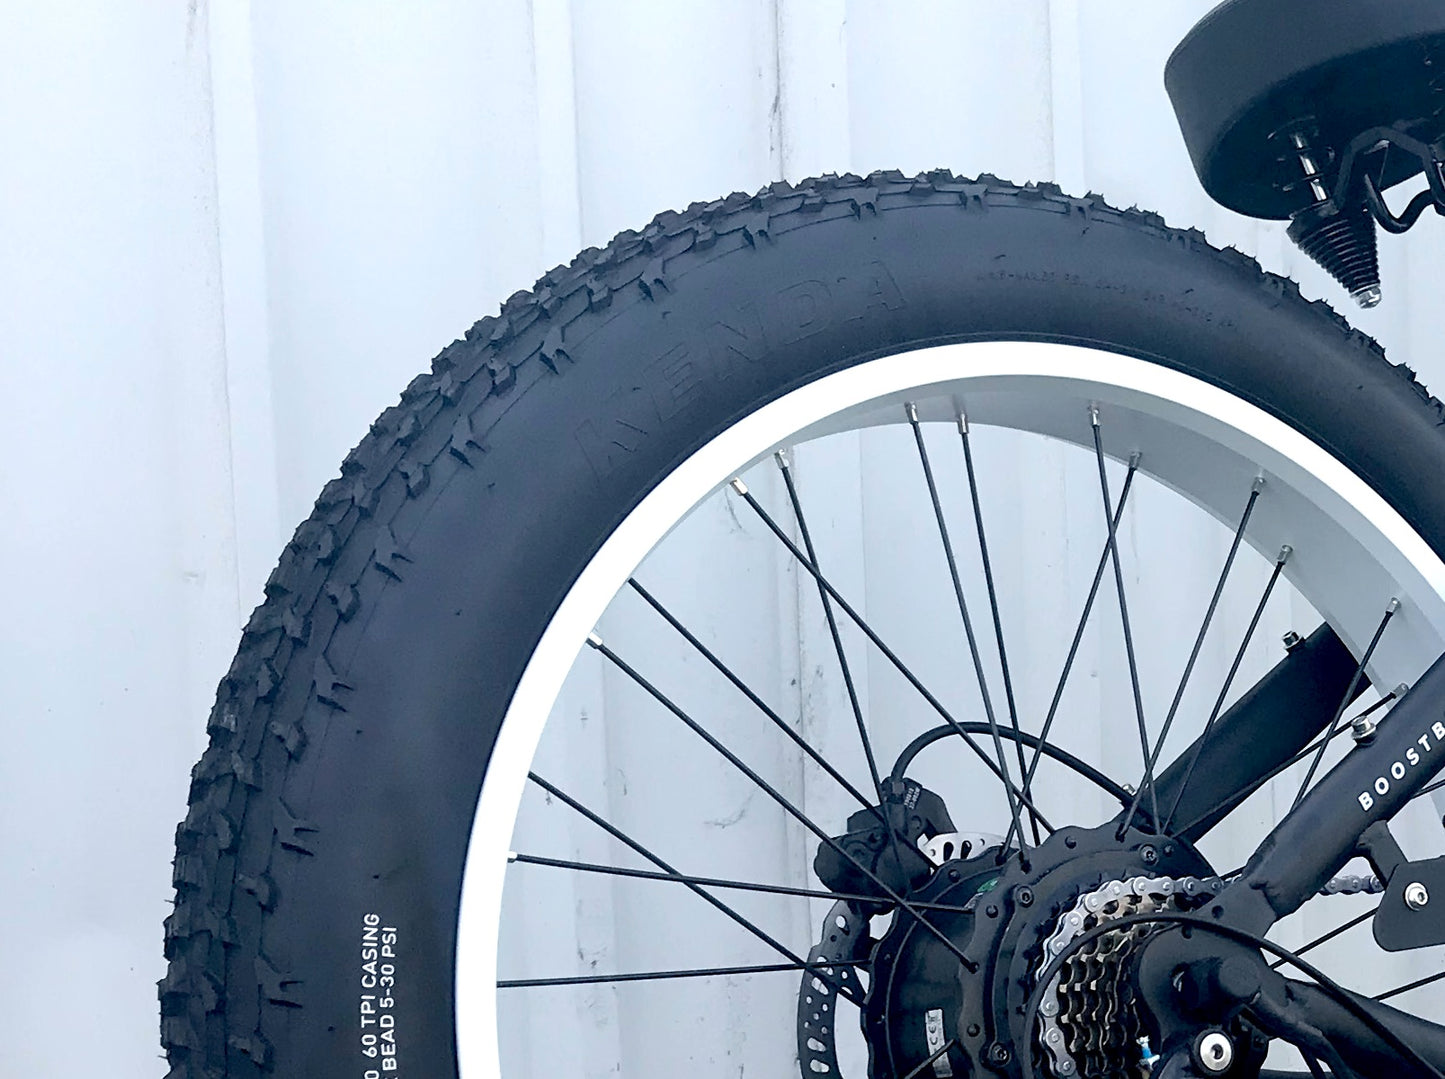 Electric Motorbike Cruiser Fat Bike with top quality components from Shimano, Bafang, Tektro and Samsung. Manufactured for Boostbikes.